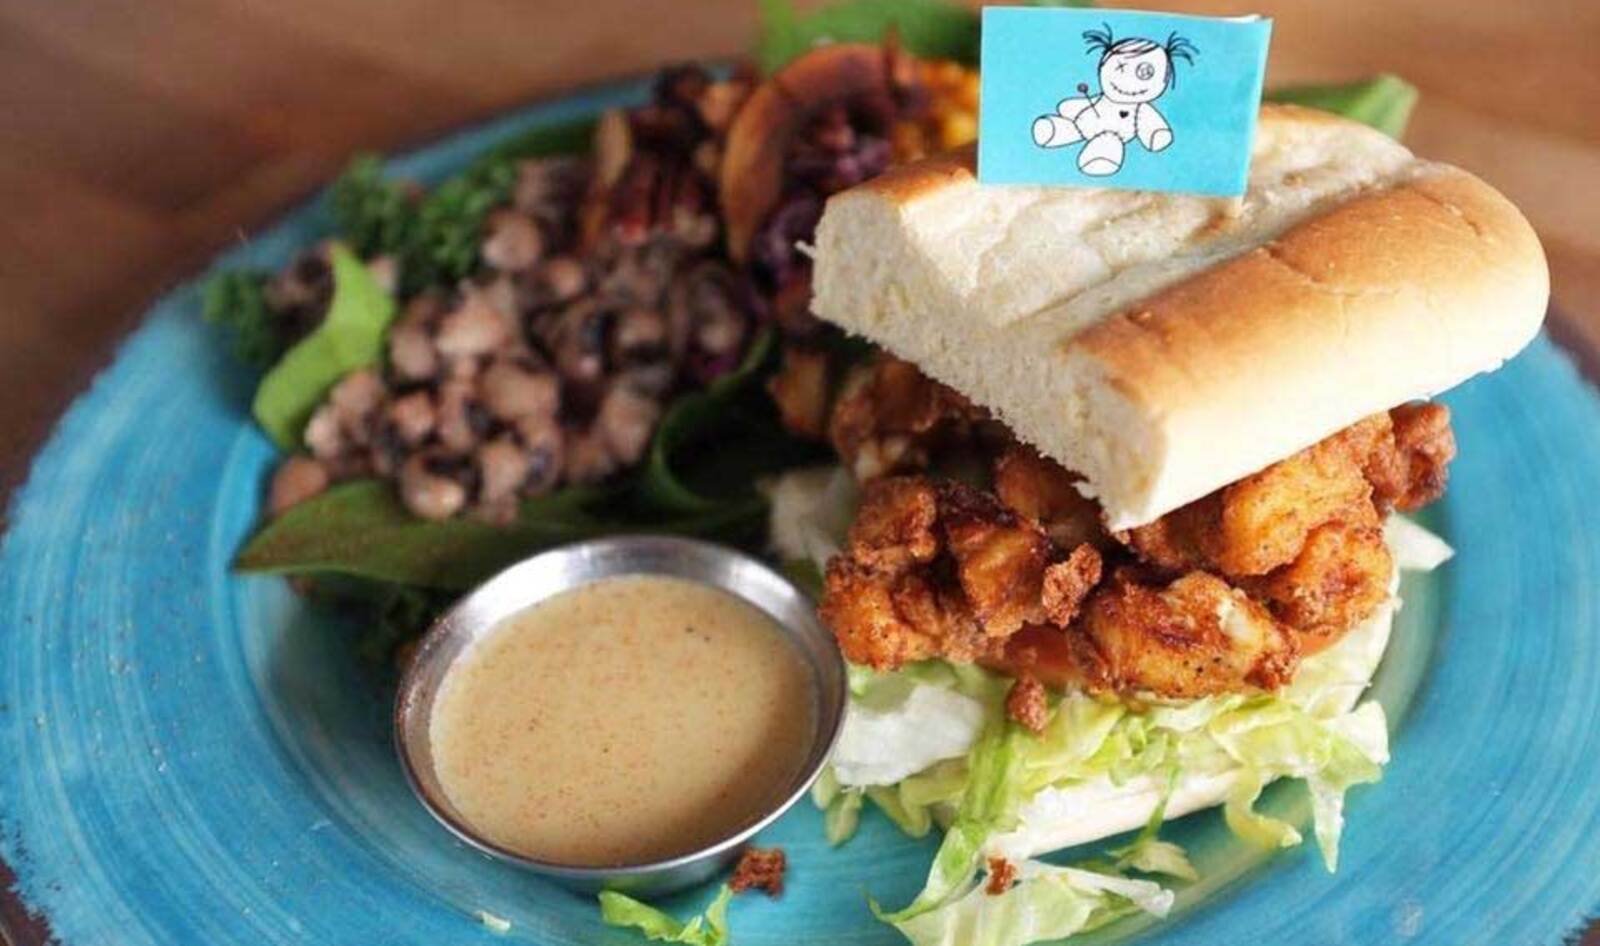 Former Petroleum Engineer to Open Vegan Po’boy Shop in Former Subway Location in Los Angeles